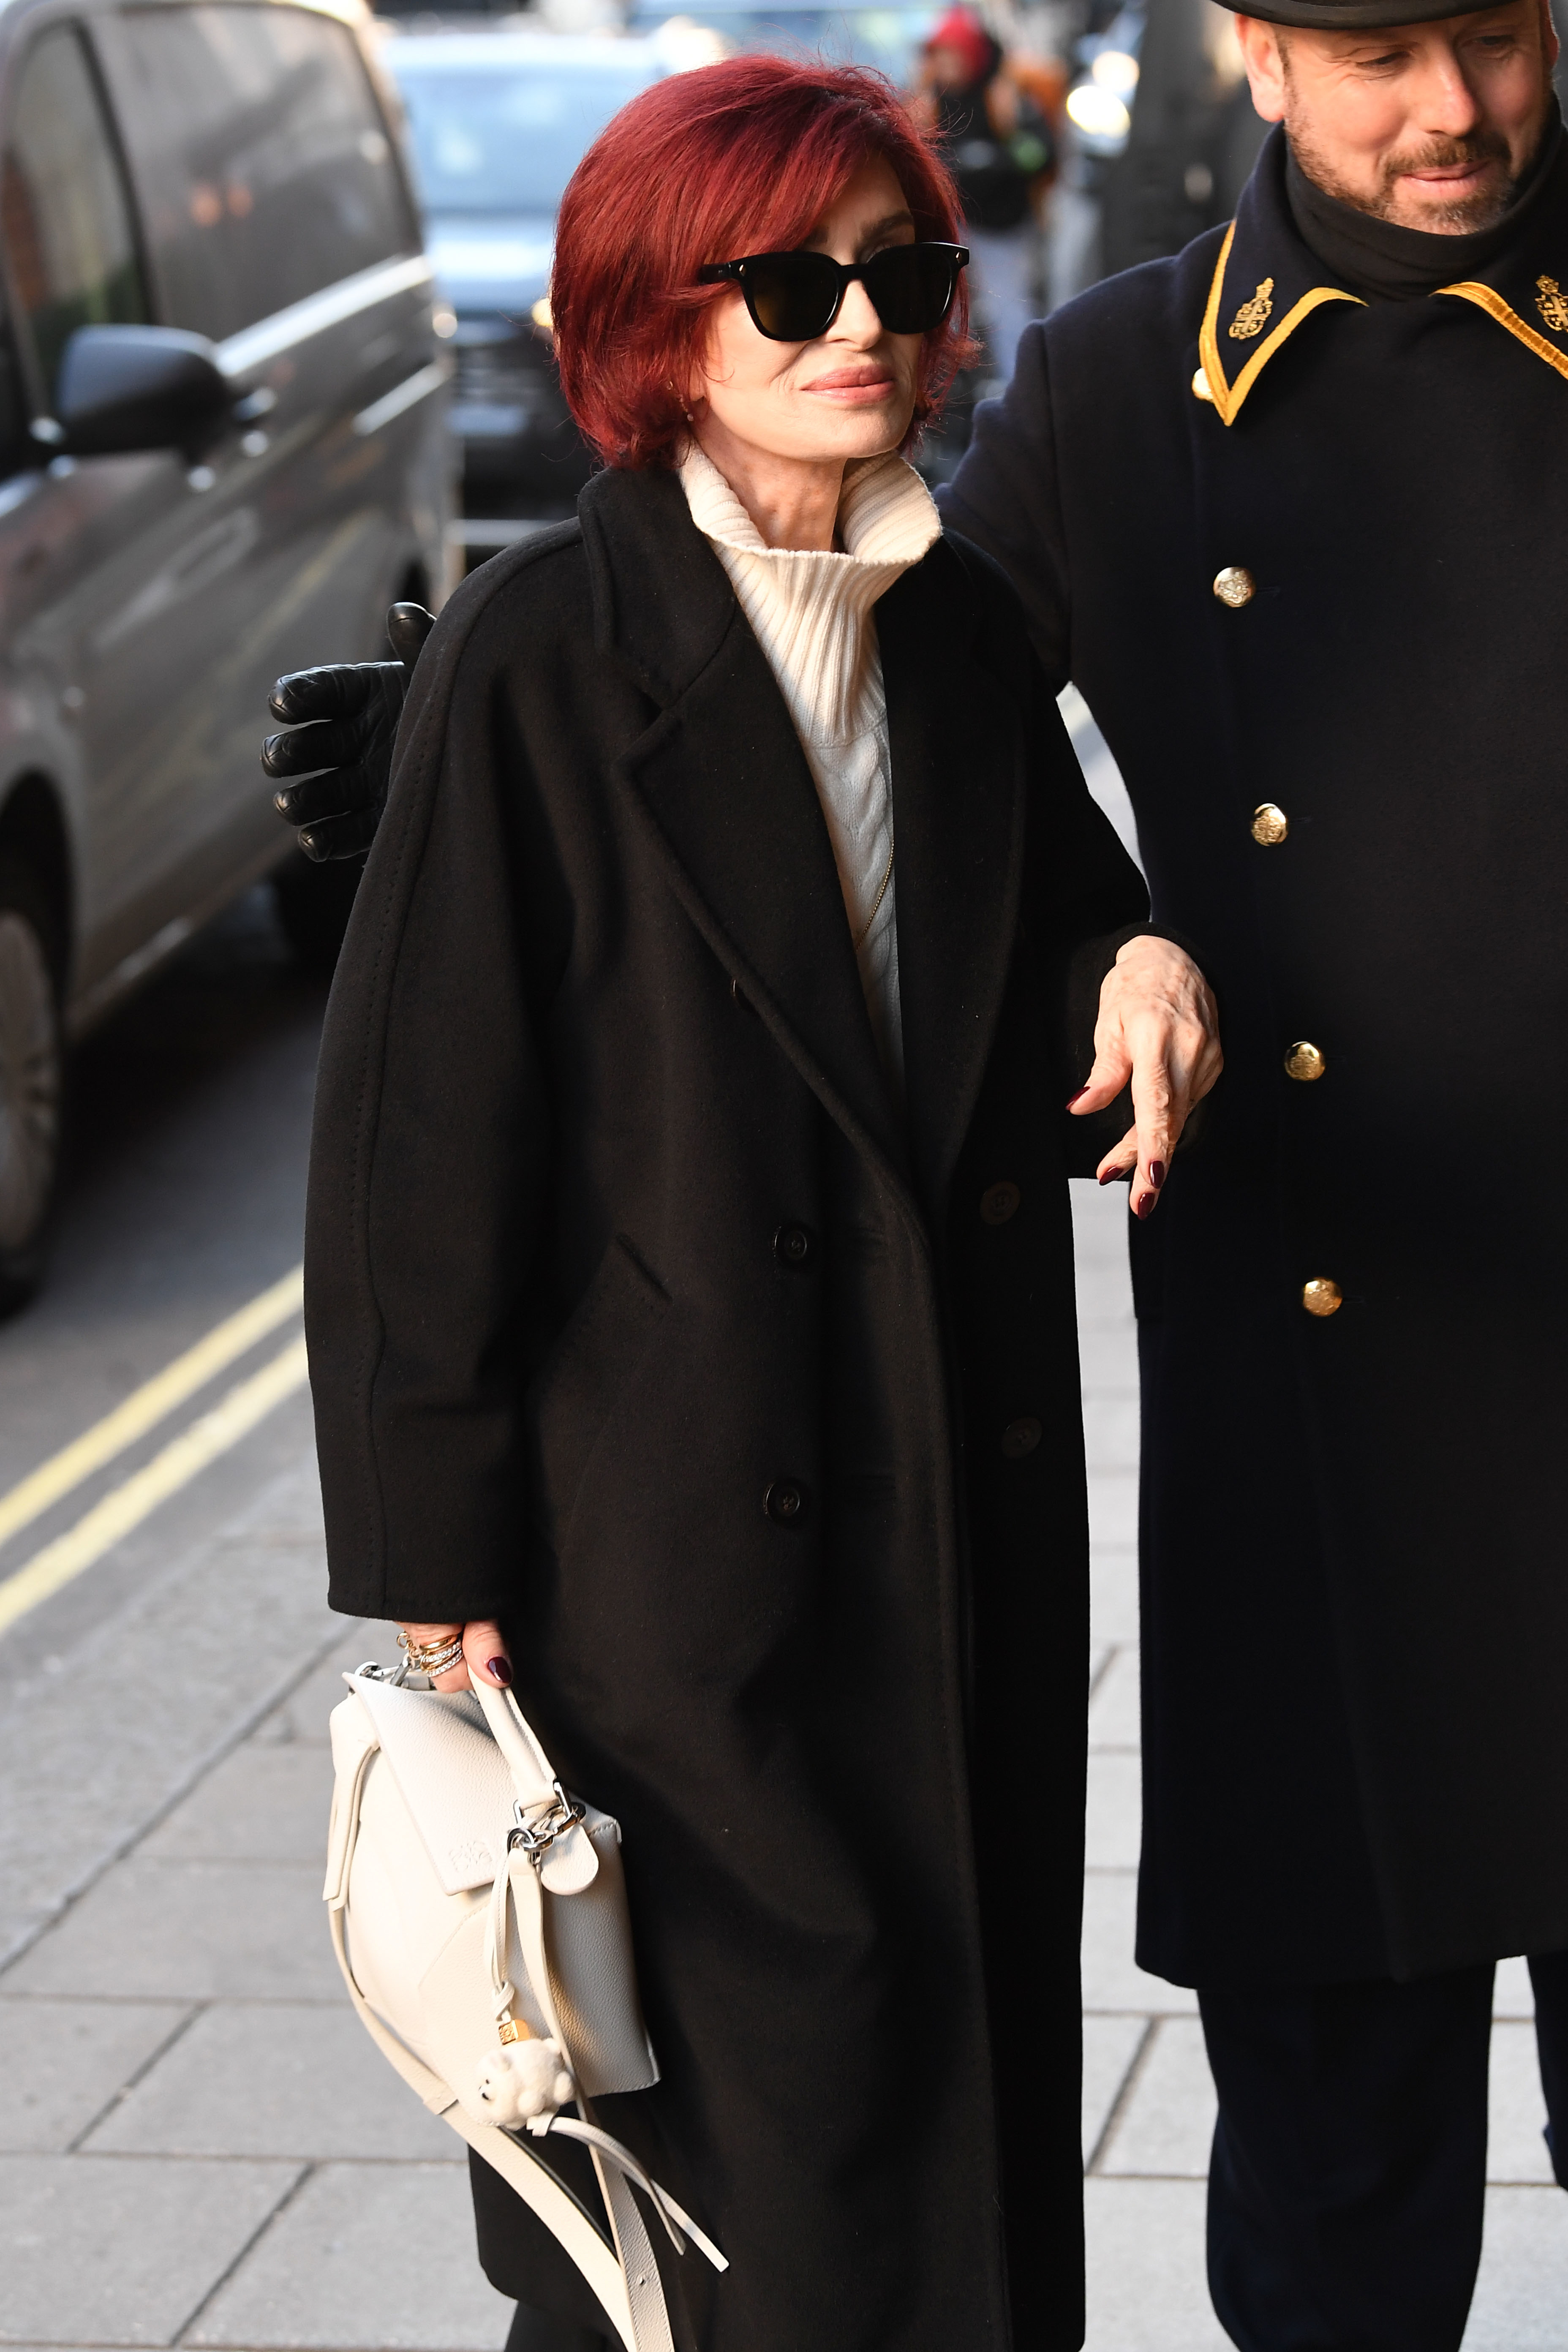 Sharon in a coat with a hite handbag escorted by a man into a building